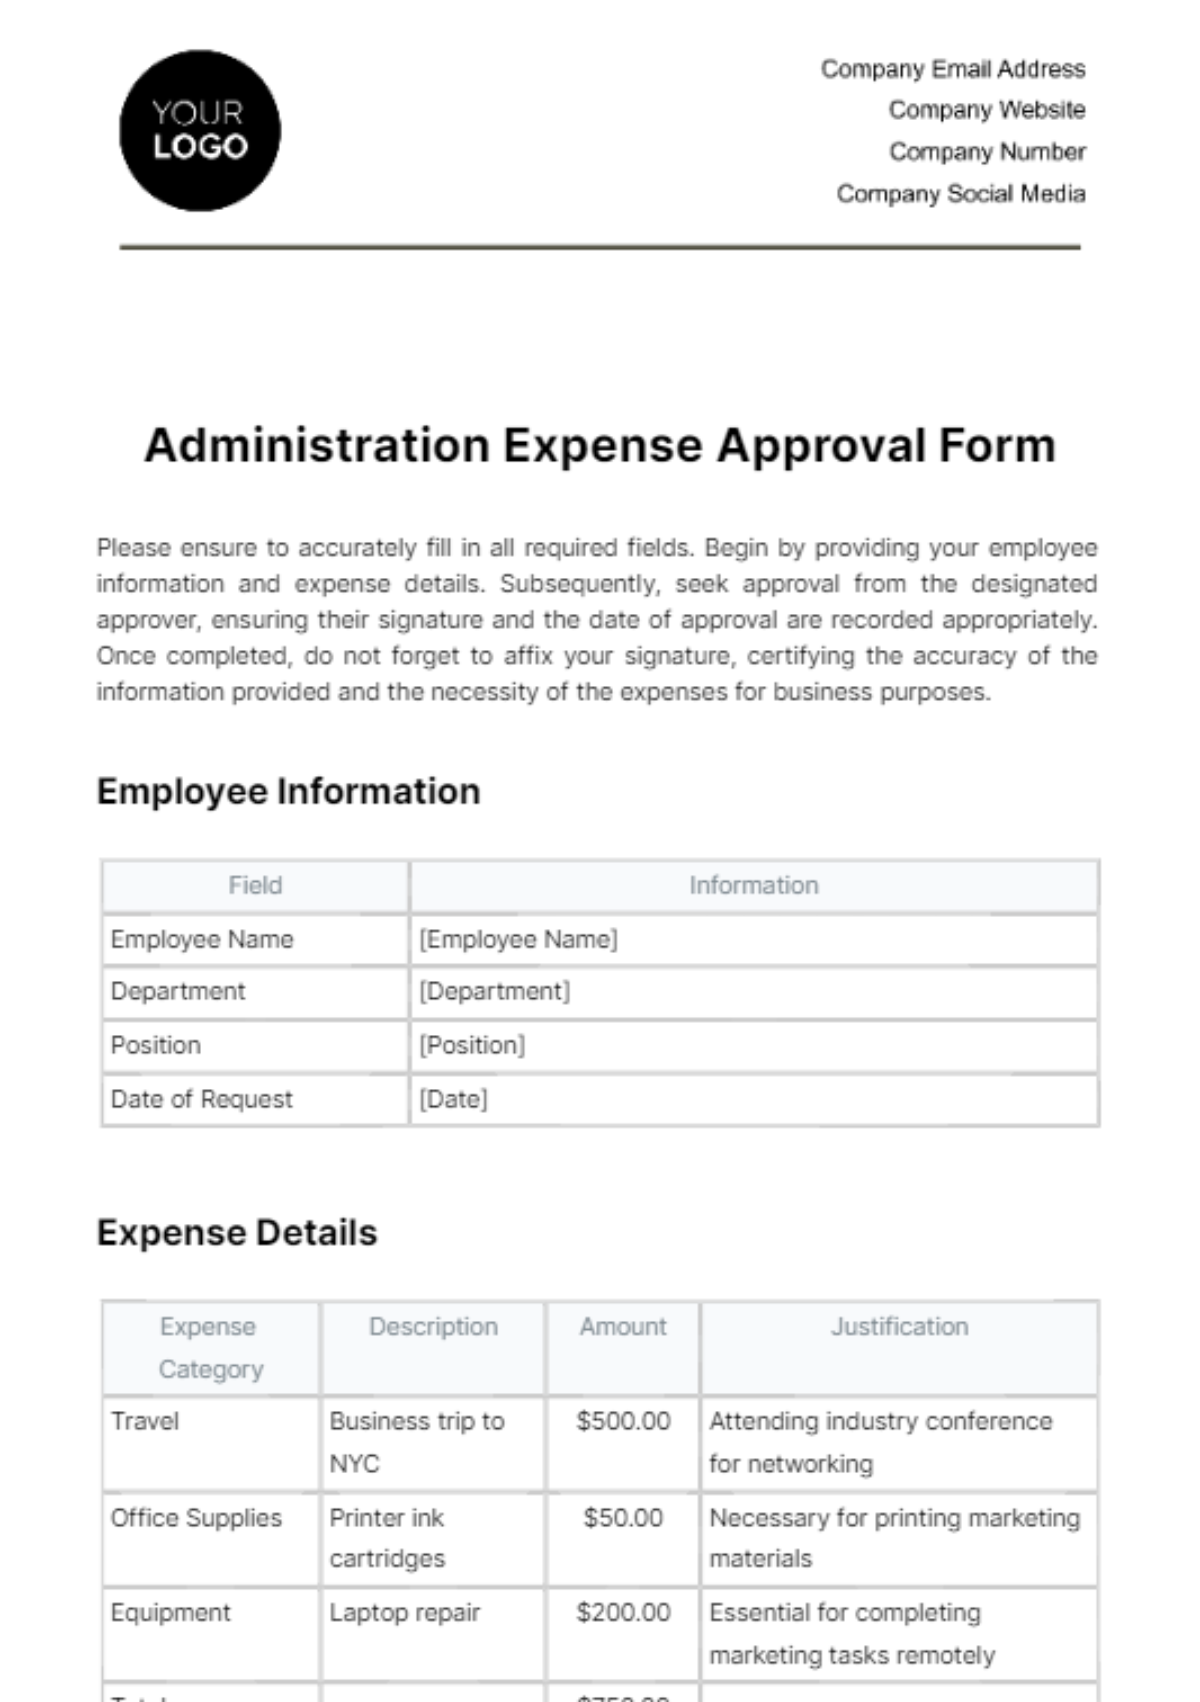 Administration Expense Approval Form Template